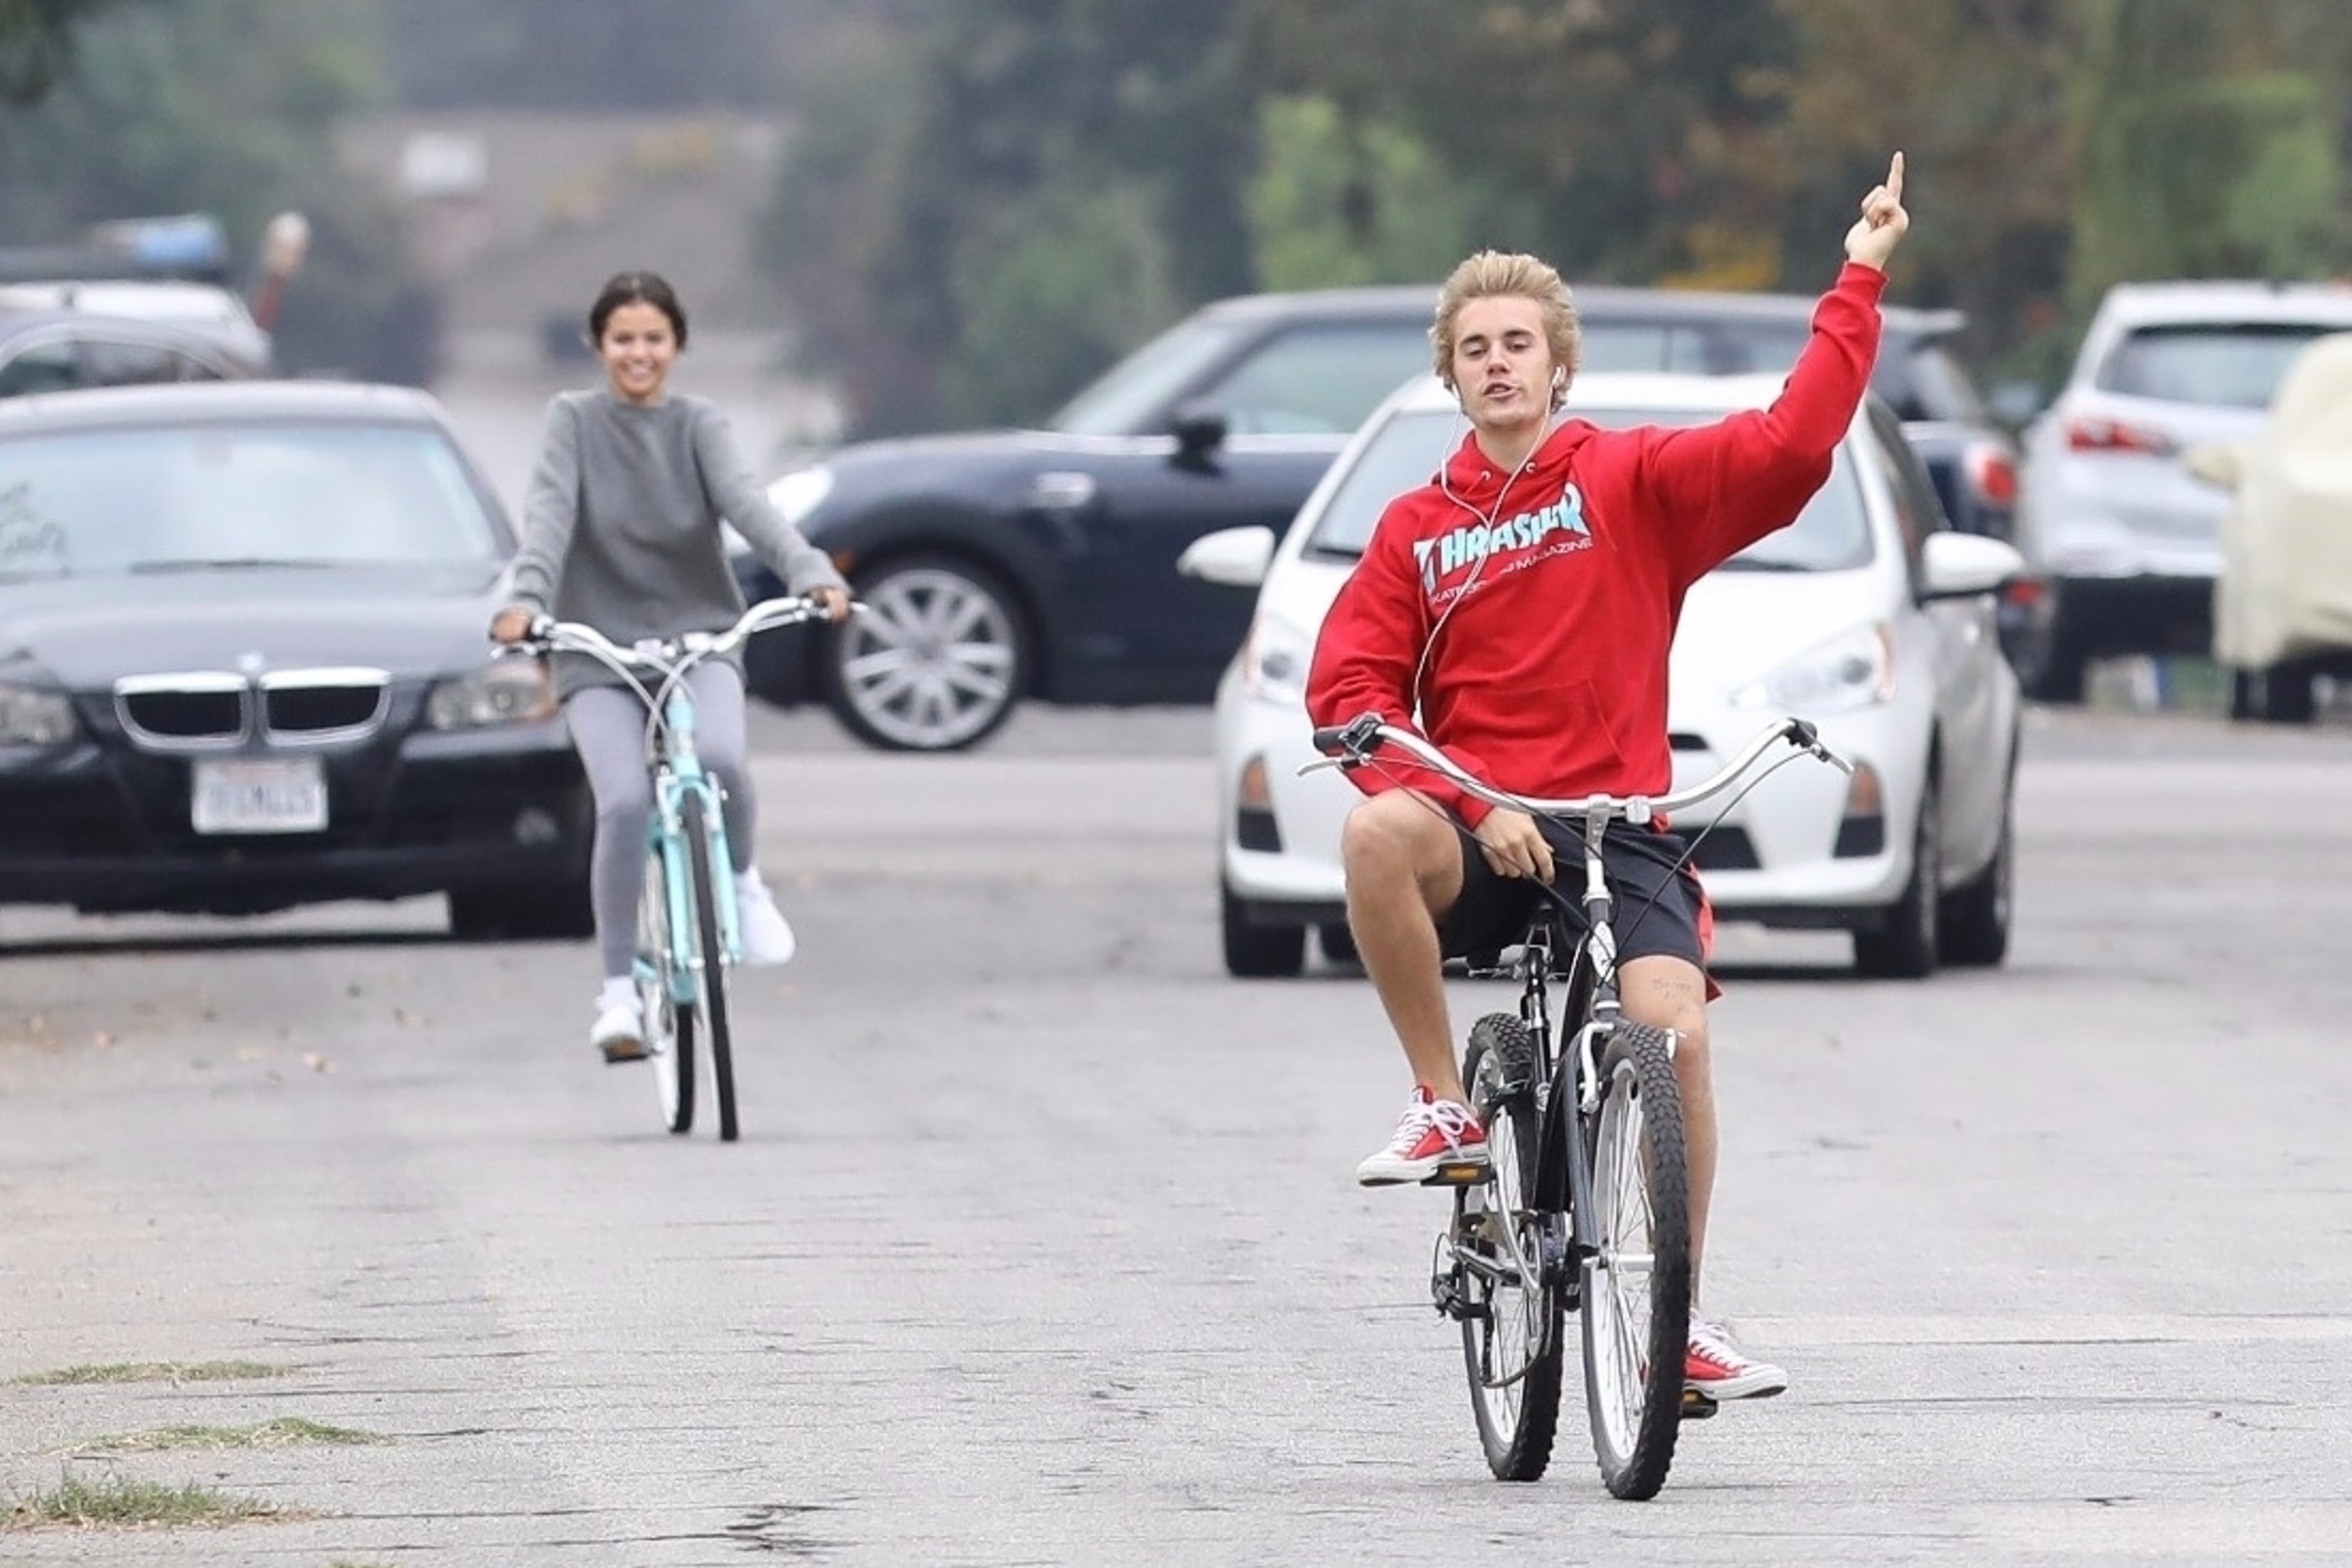 Selena Gomez and Justin Bieber spotted bike riding together!